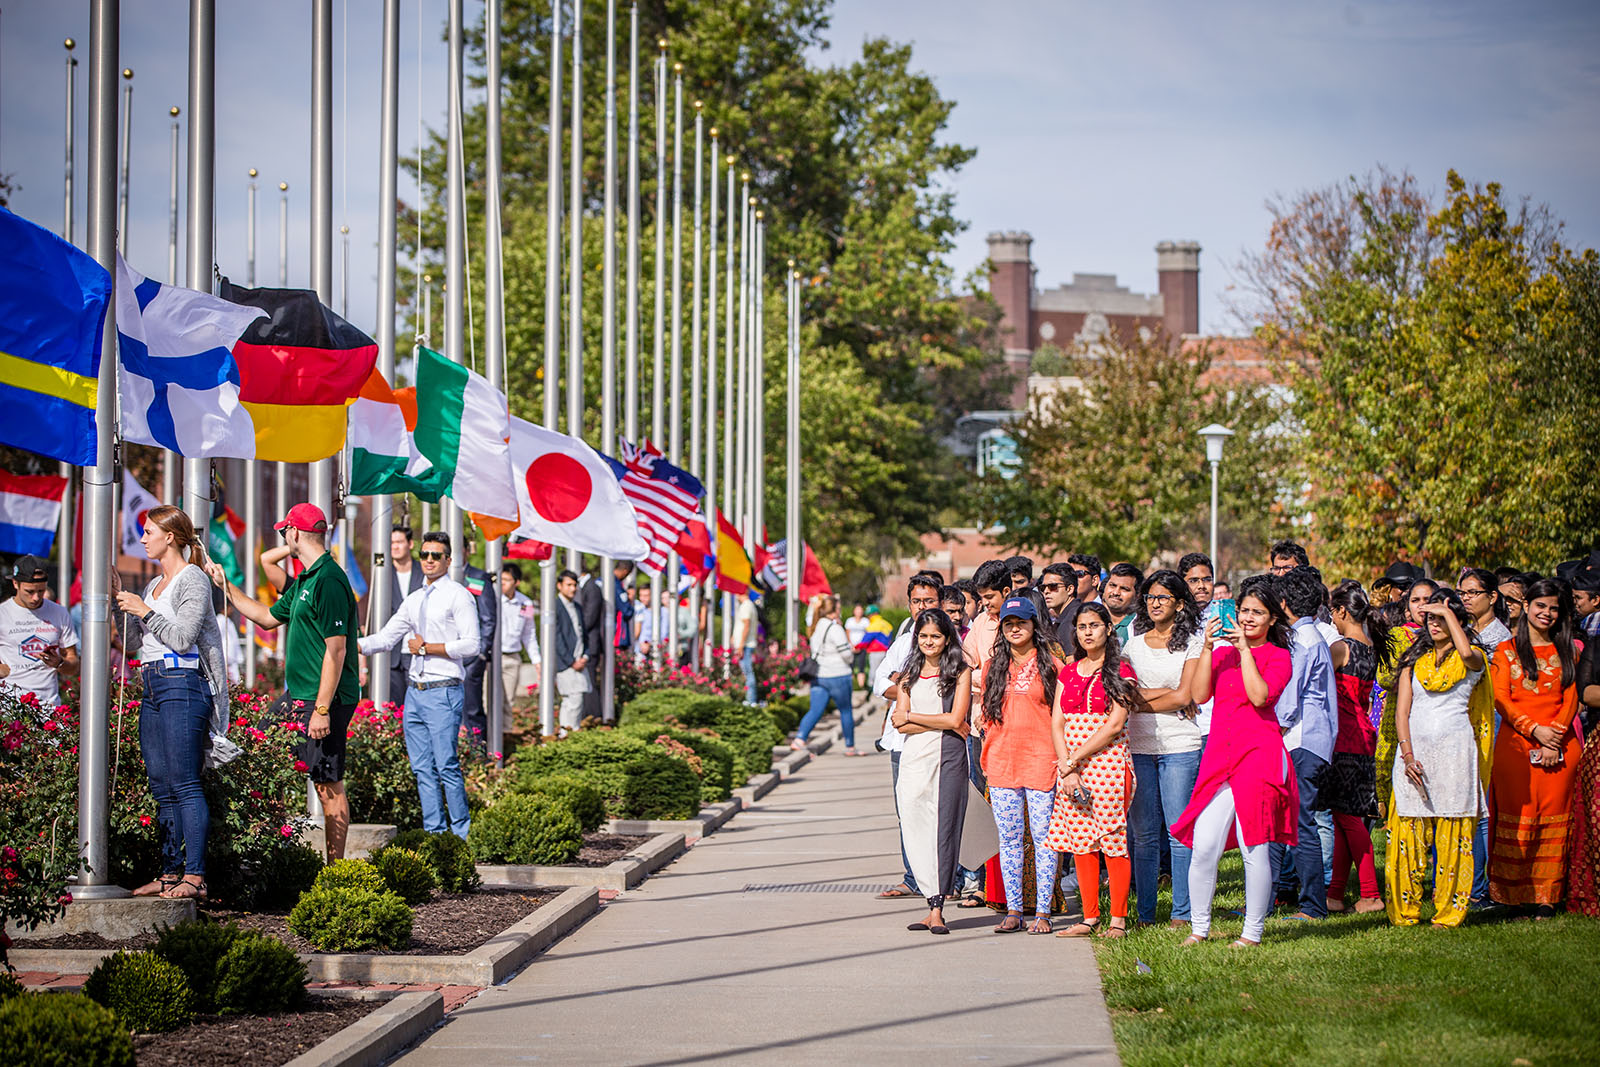 During Northwest’s annual flag-raising ceremony each fall, the University’s international community gathers and students raise their country's flags in accordance with United Nations protocol.